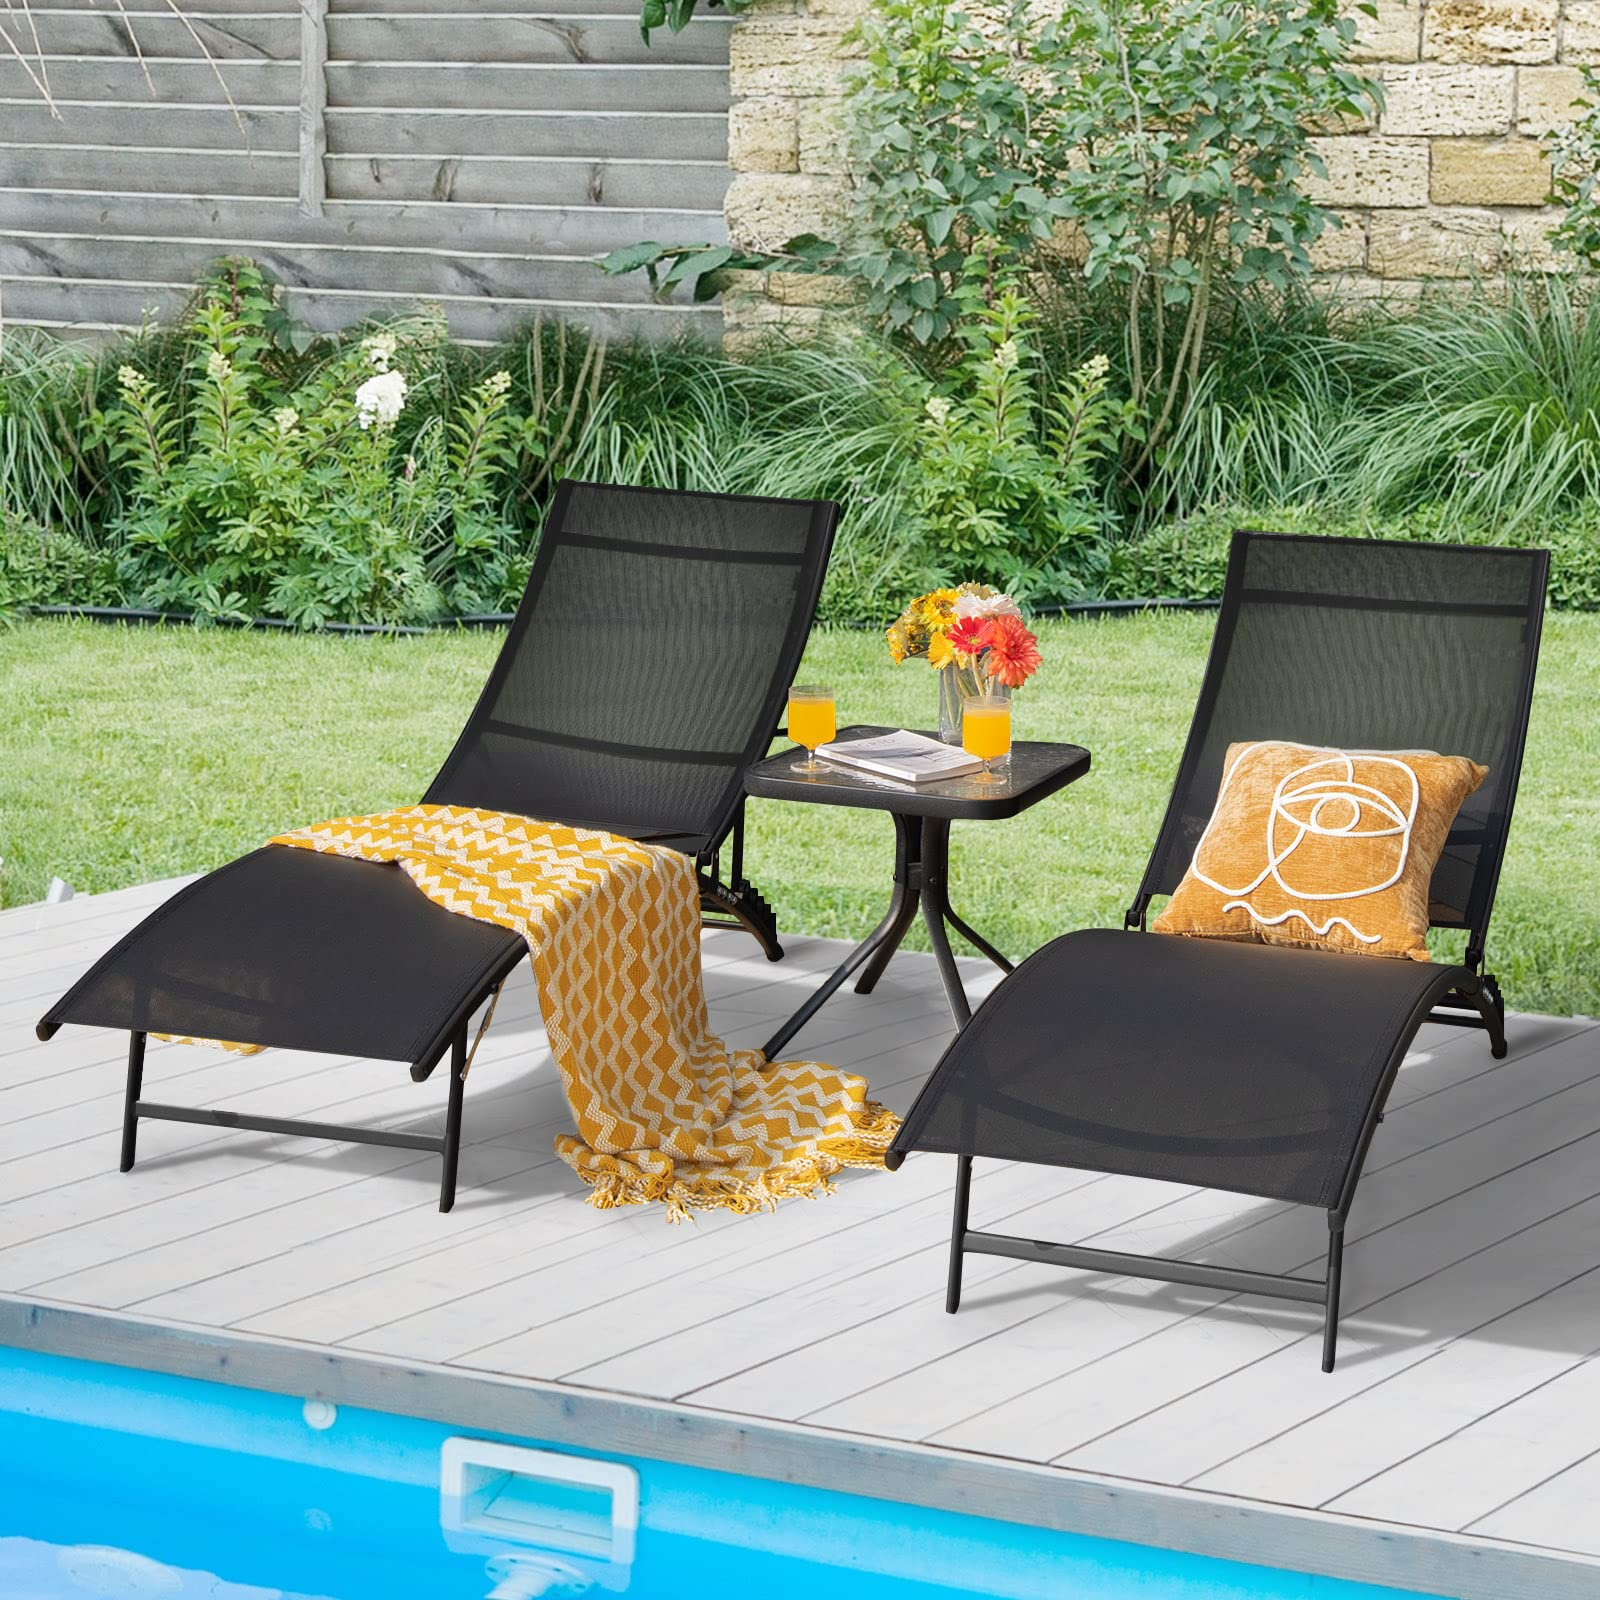 Giantex Outdoor Chaise Lounge Set of 2, Foldable Pool Lounge Chairs